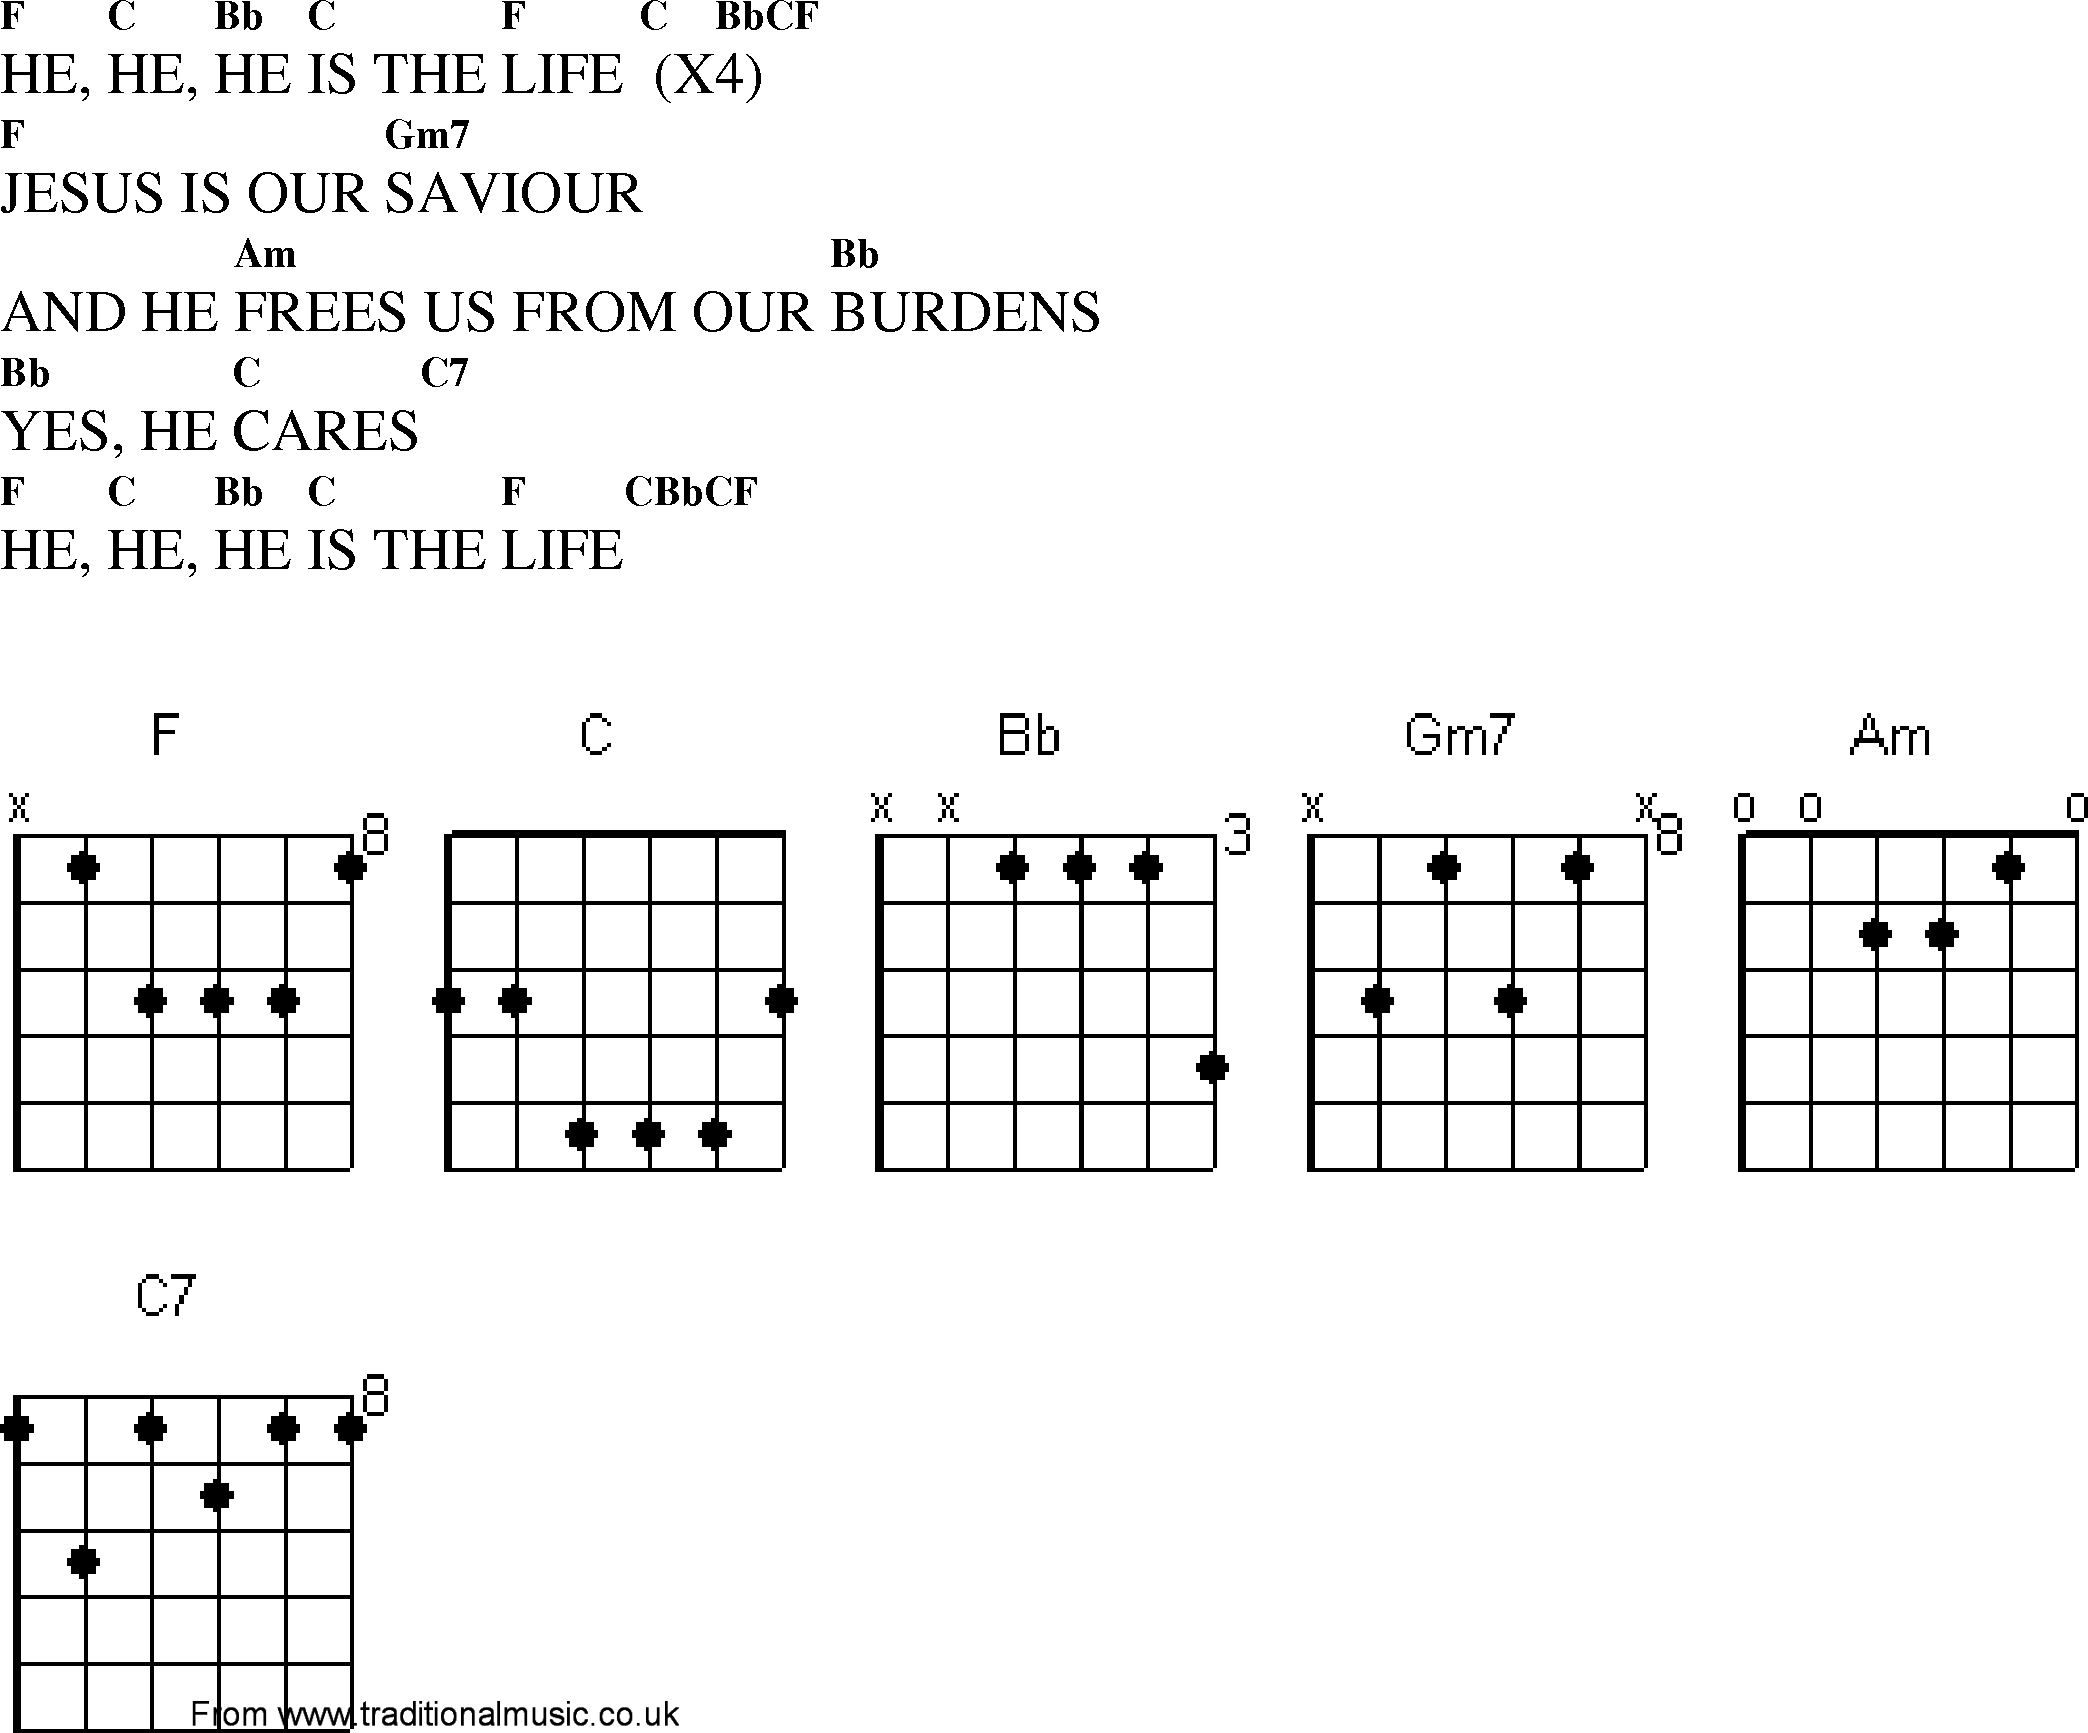 Gospel Song: he_he_he_is_the_live, lyrics and chords.